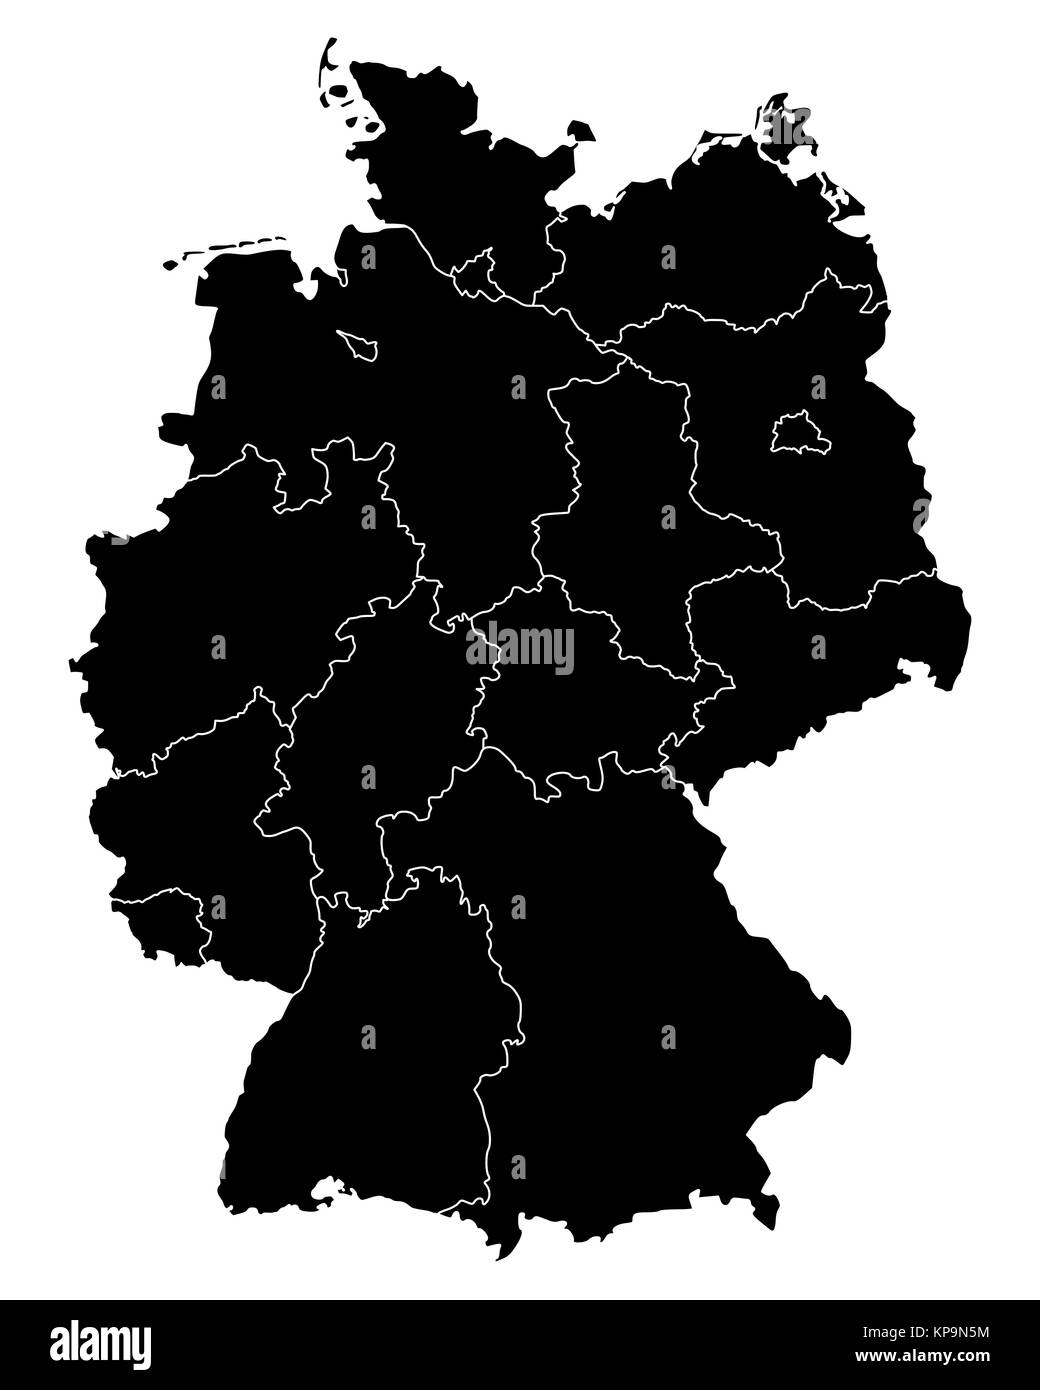 map of germany Stock Photo